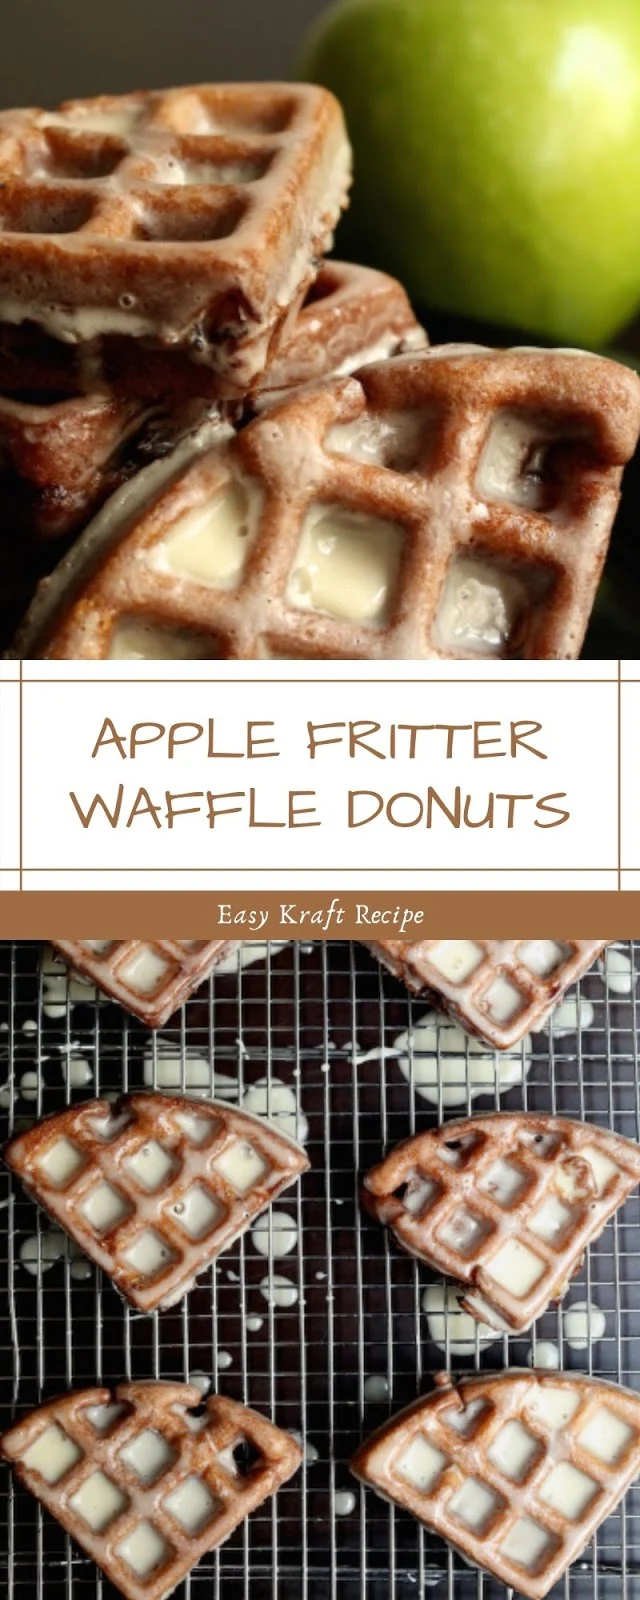 APPLE FRITTER WAFFLE DONUTS